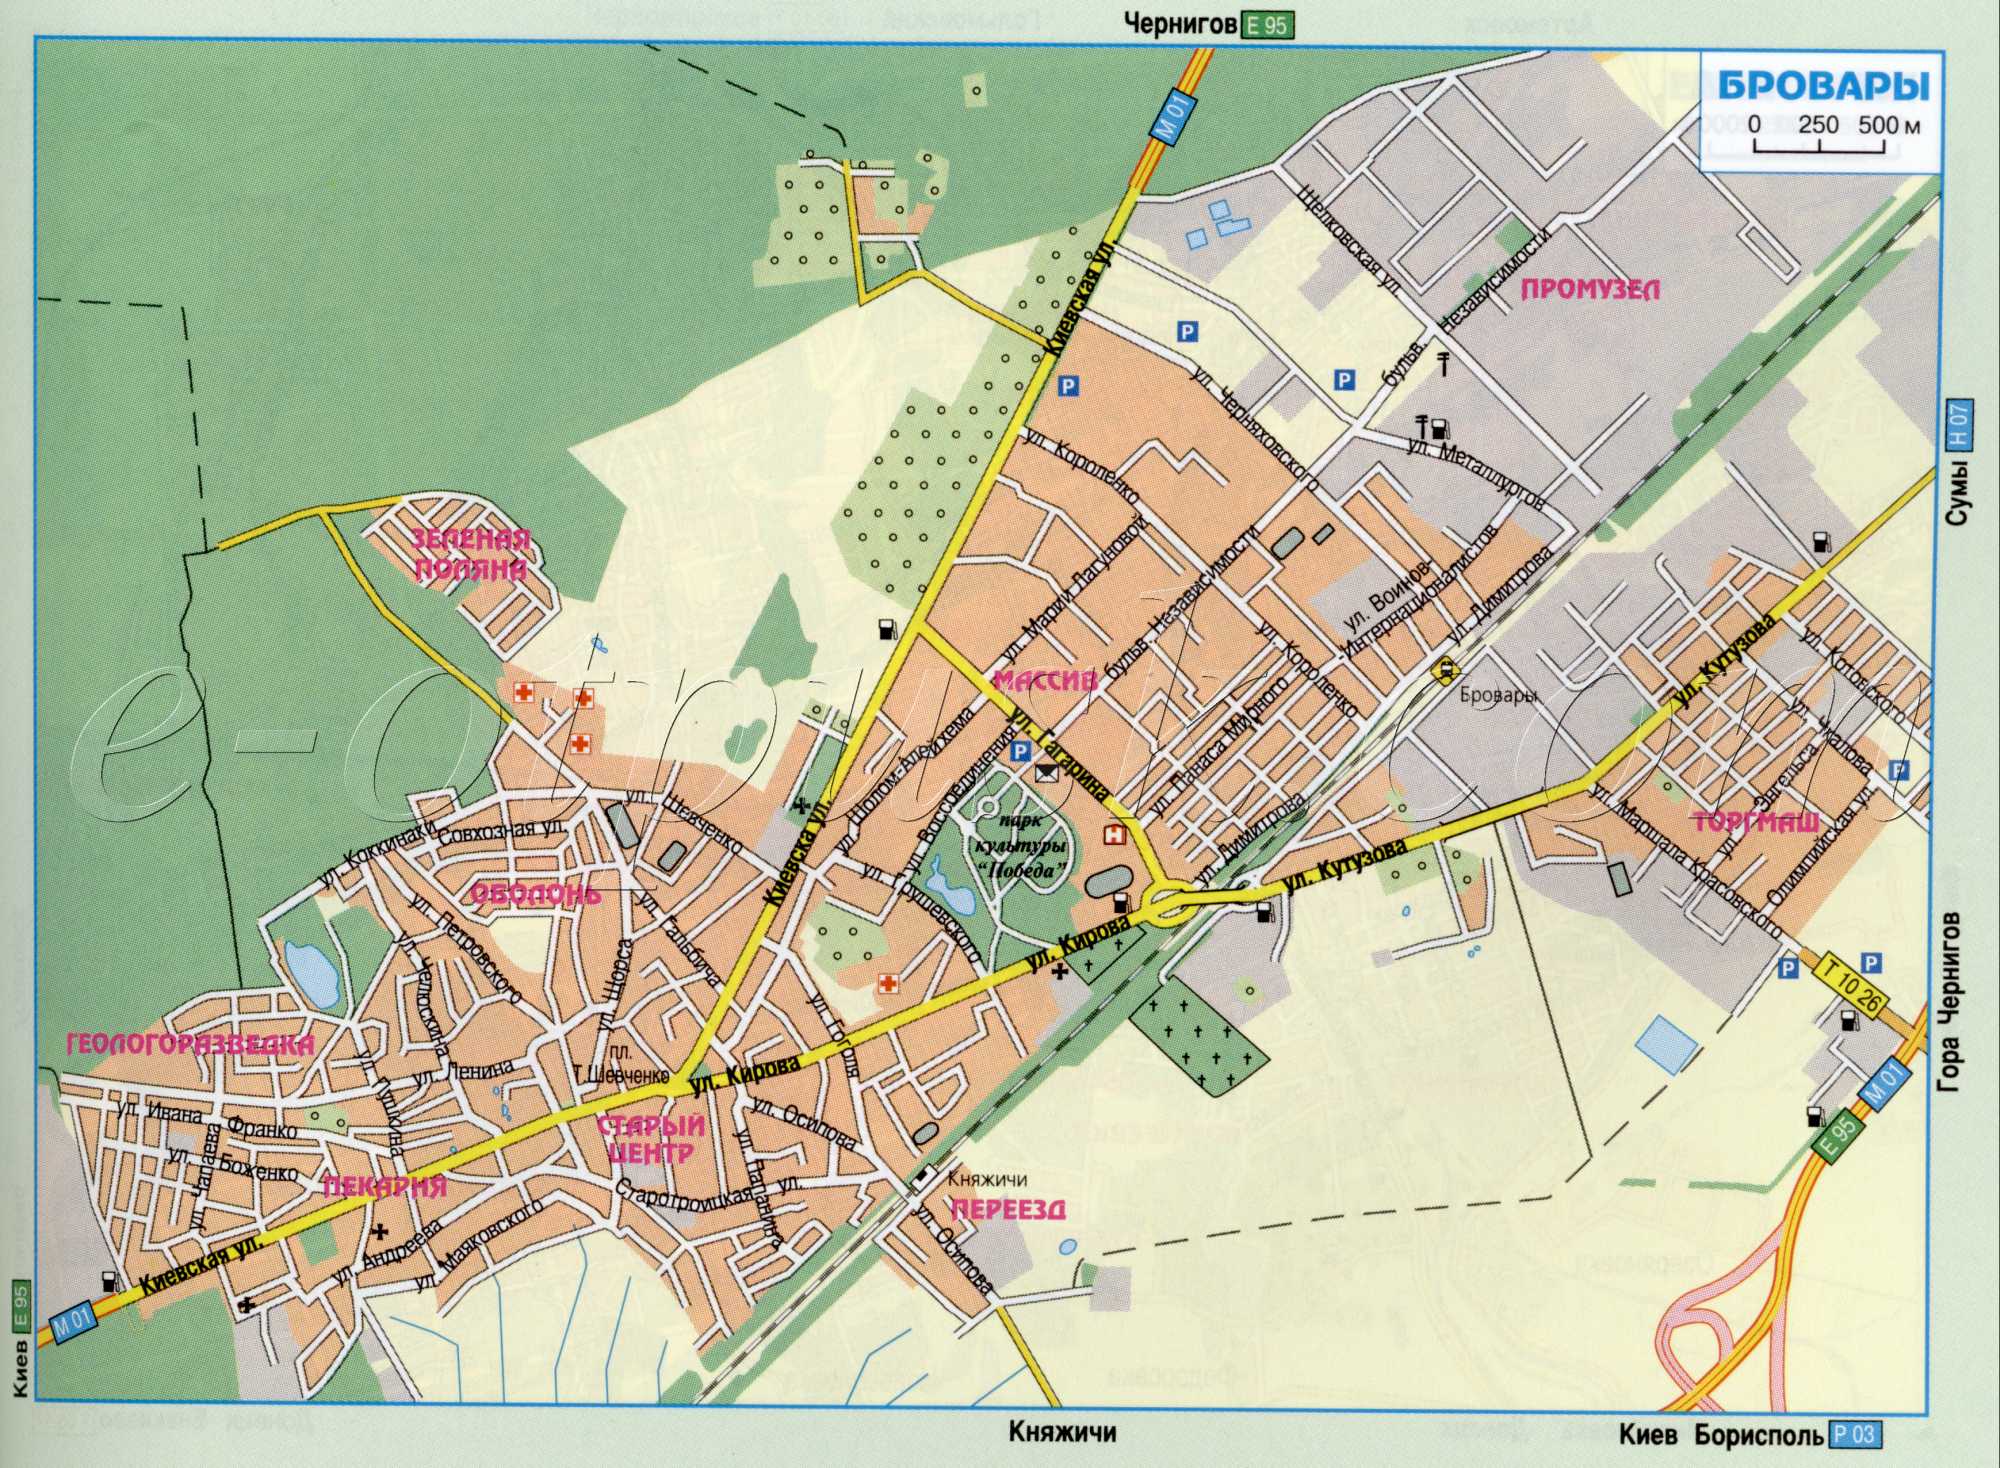 Brovary map. Schematic map of the main roads of the city Brovary, Kyiv region. Download the map